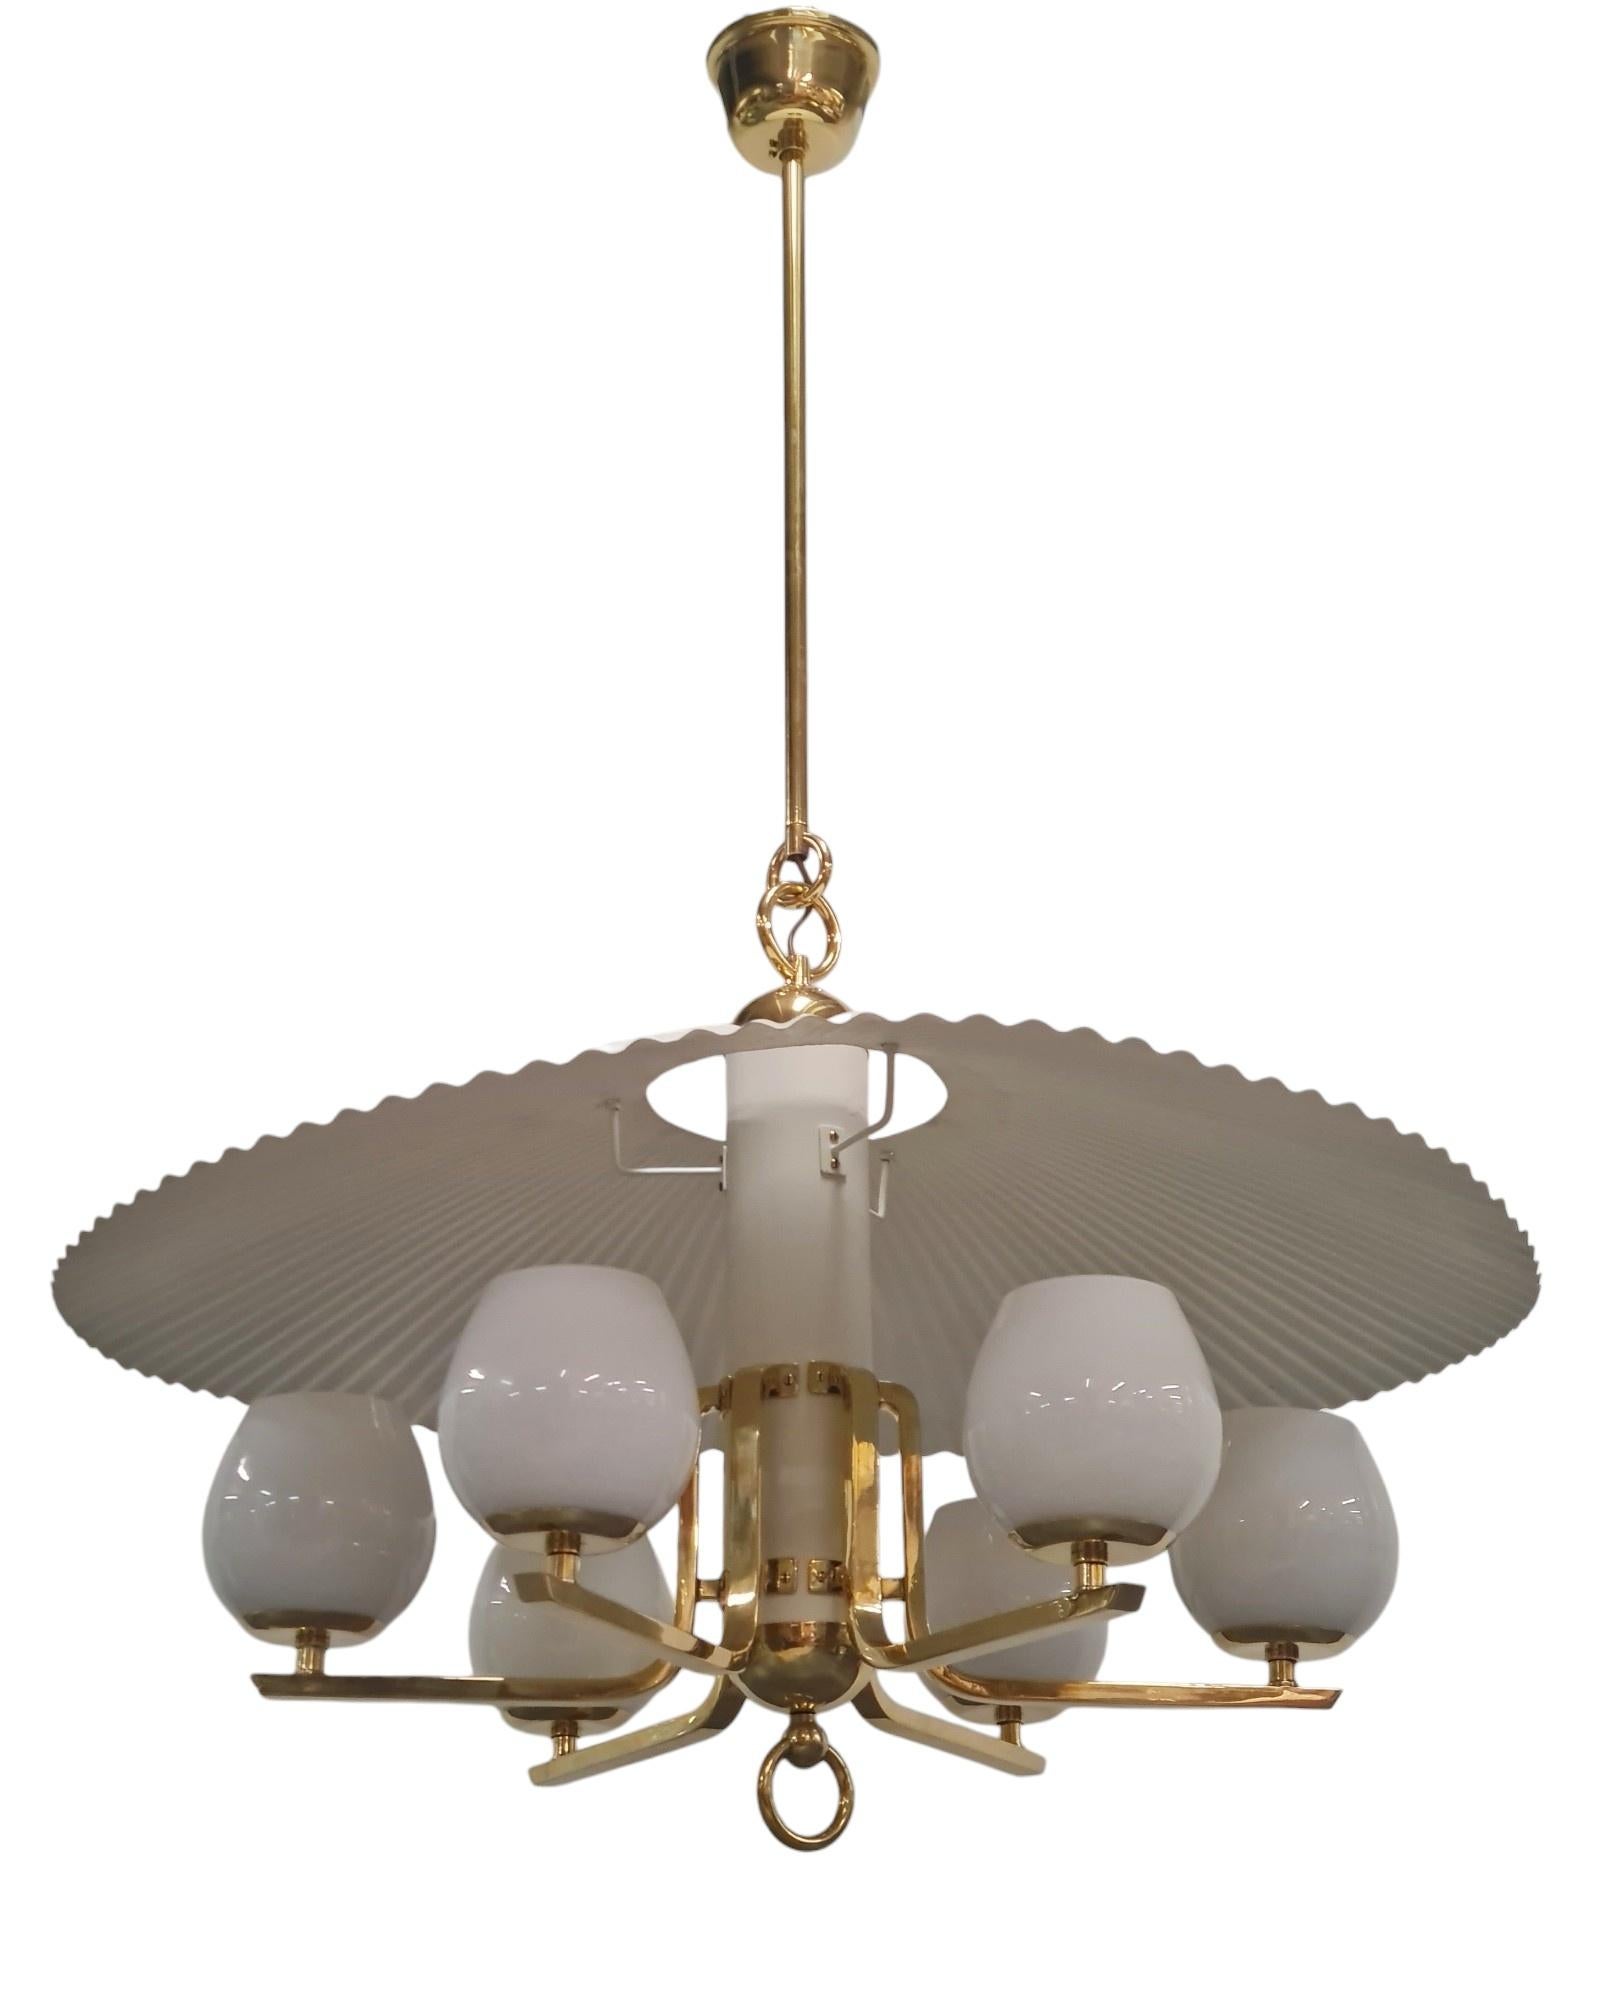 A Comissioned Paavo Tynell Ceiling Lamp, Taito, 1940s For Sale 2